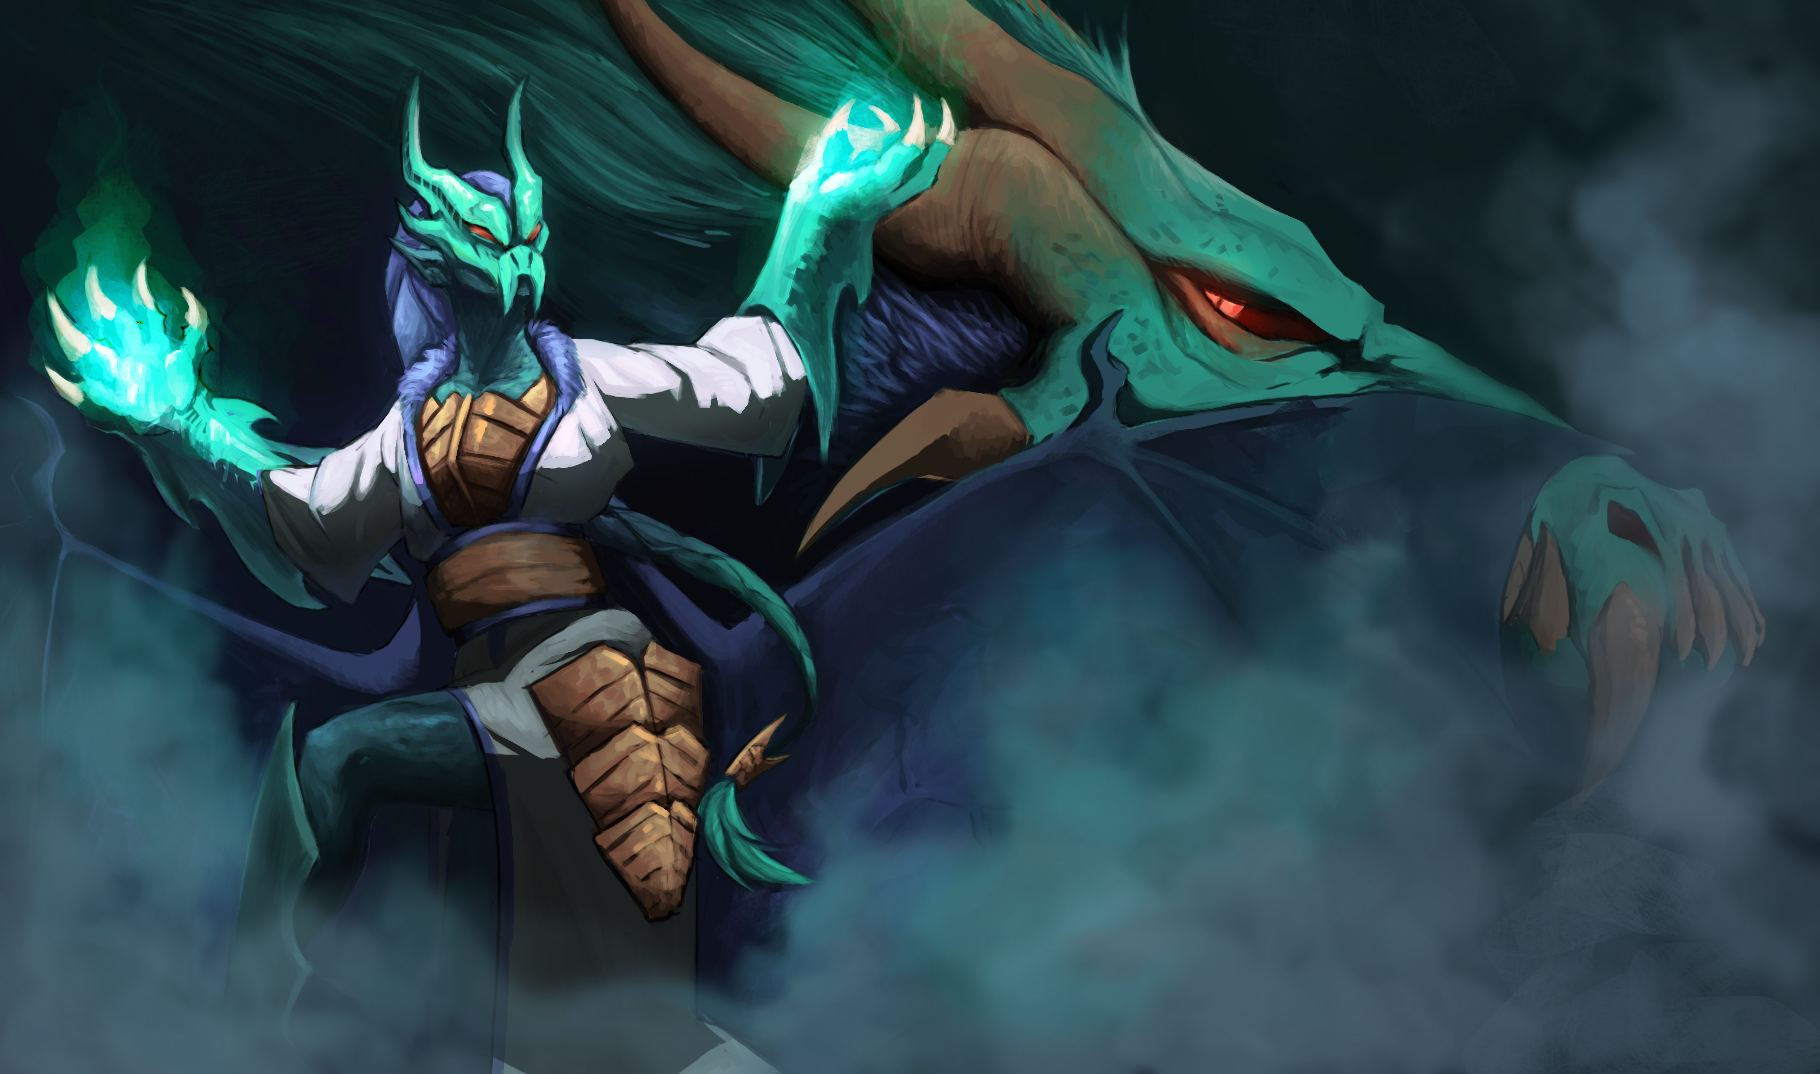 BA Games art Fan made Concept artwork by Charlotte Hinkins for League of legends champion Shyvana, shows Shyvana up front with a blue scaled dragon behind her.